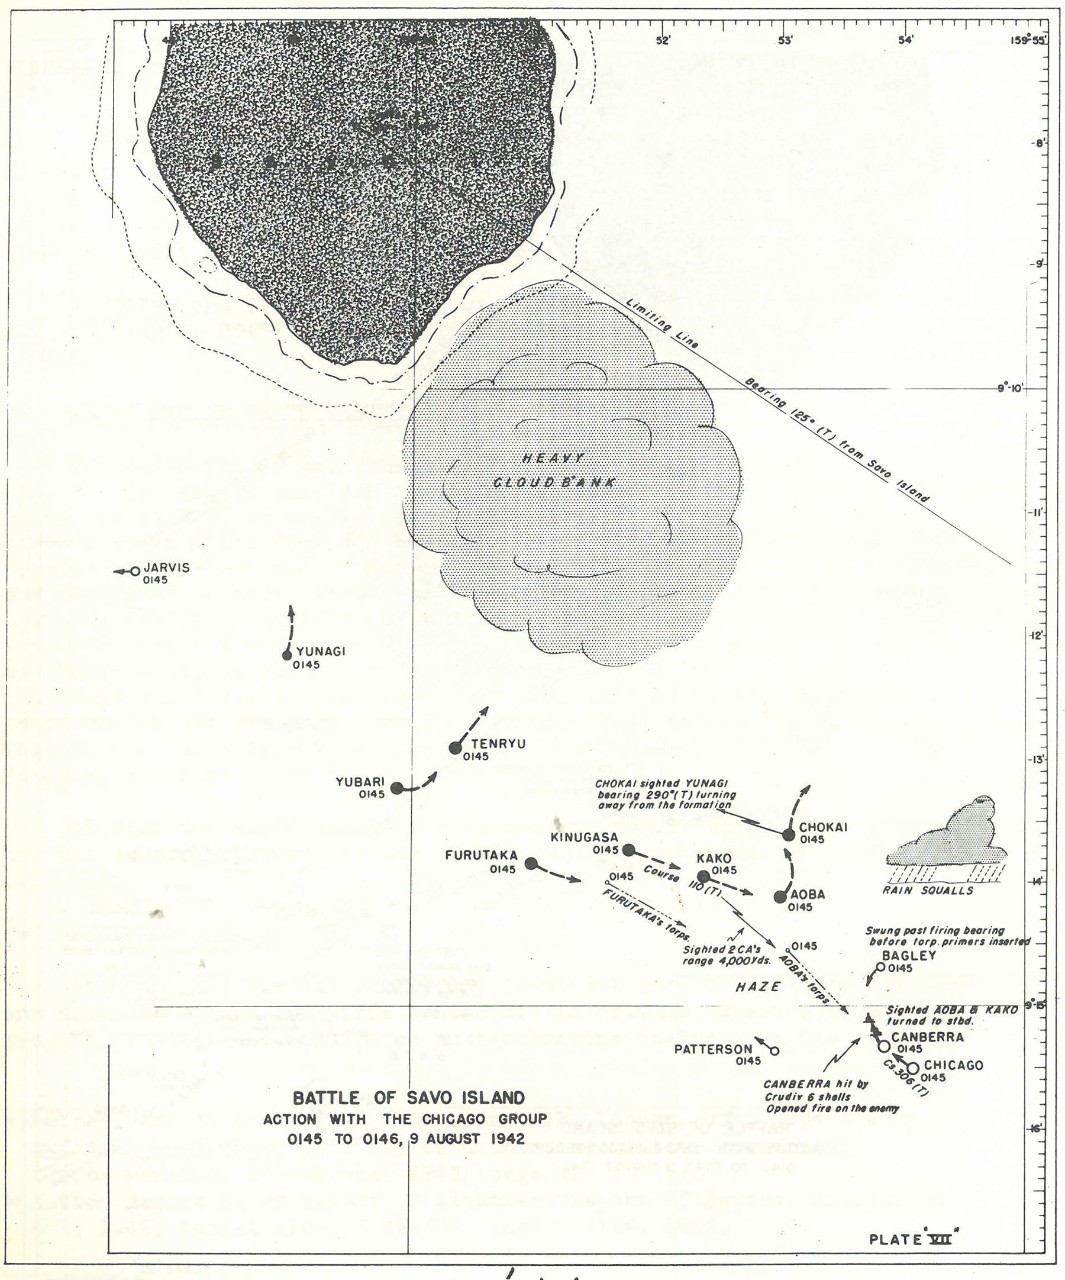 Plate 7: Battle of Savo Island, Action with the CHICAGO Group, 0145 to 0146, 9 August 1942 - chart - The Battle of Savo Island August 9, 1942 Strategical and Tactical Analysis